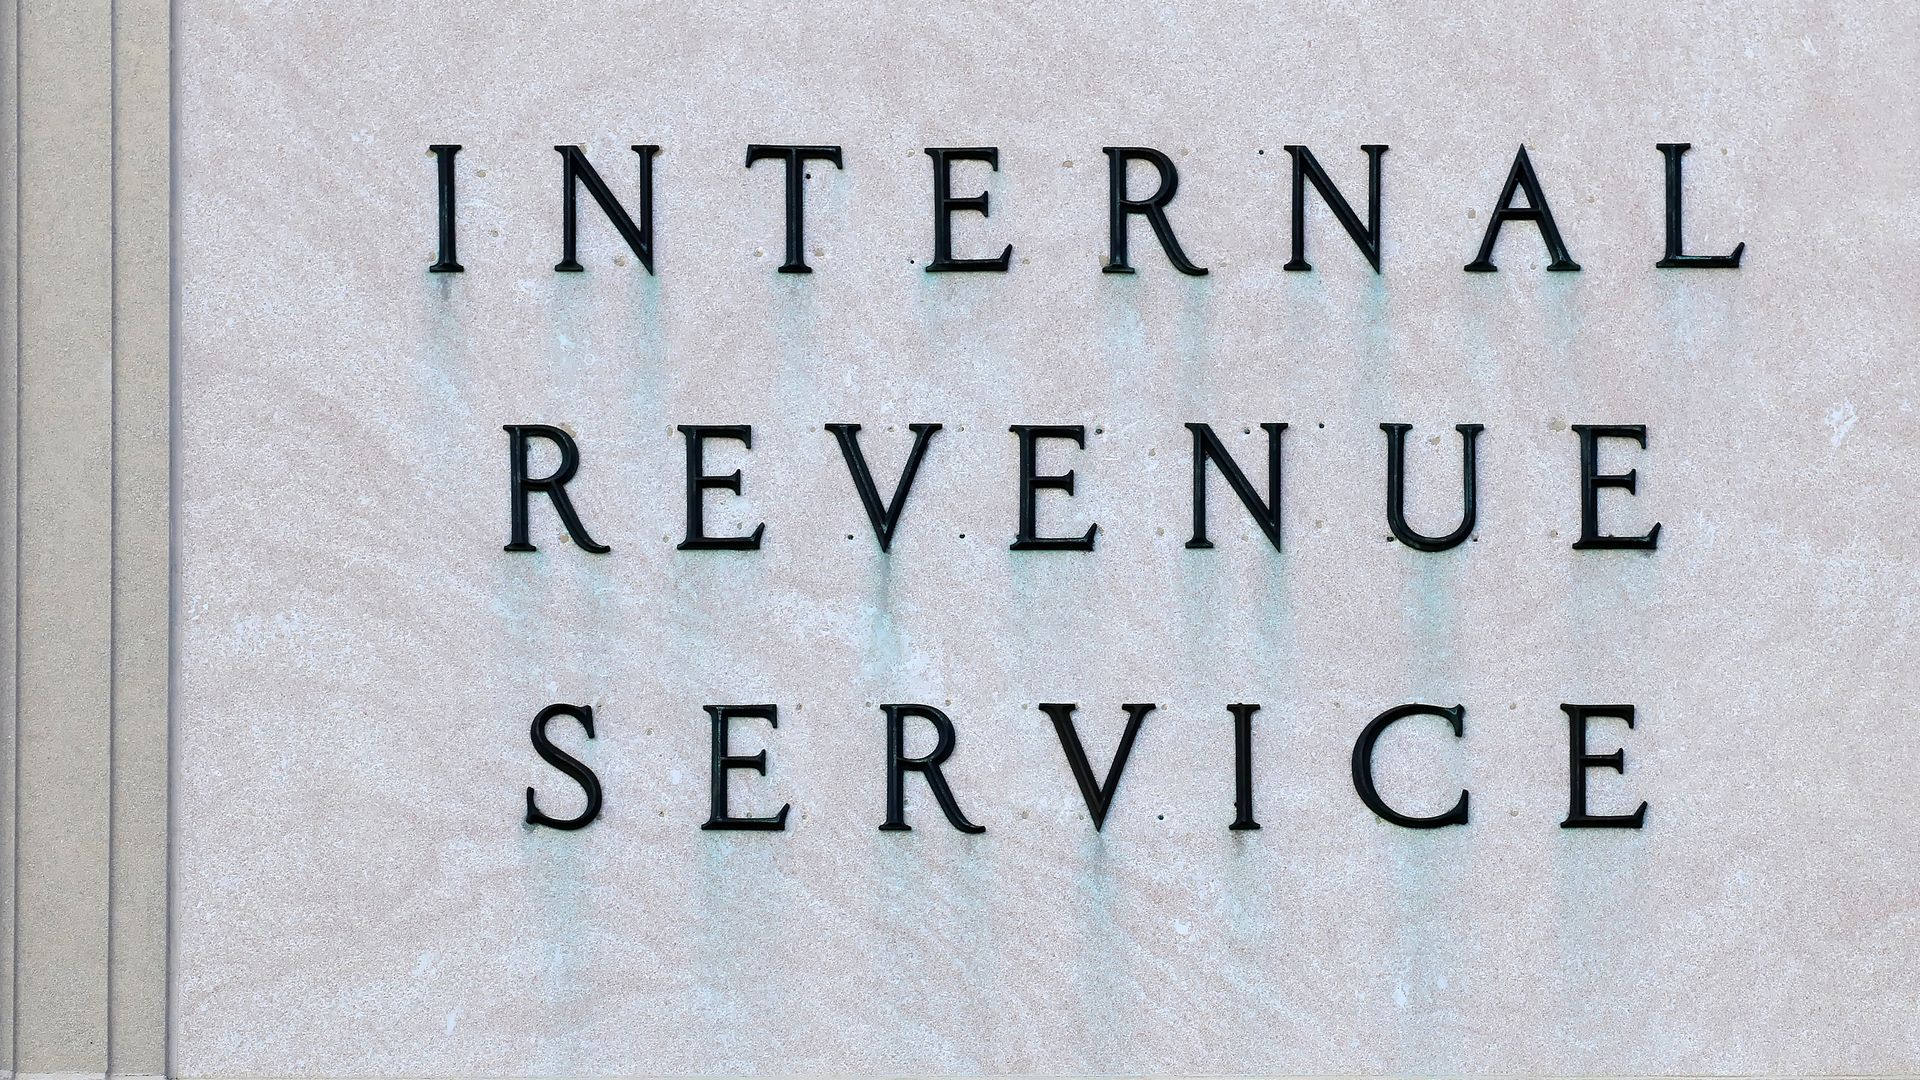 The IRS faces new scrutiny after a government watchdog found the agency lost millions of tax records containing sensitive information. Those tax records come from two different agency storage facilities in California and Utah and involve both business and individual tax records reportedly from the fiscal year 2010.